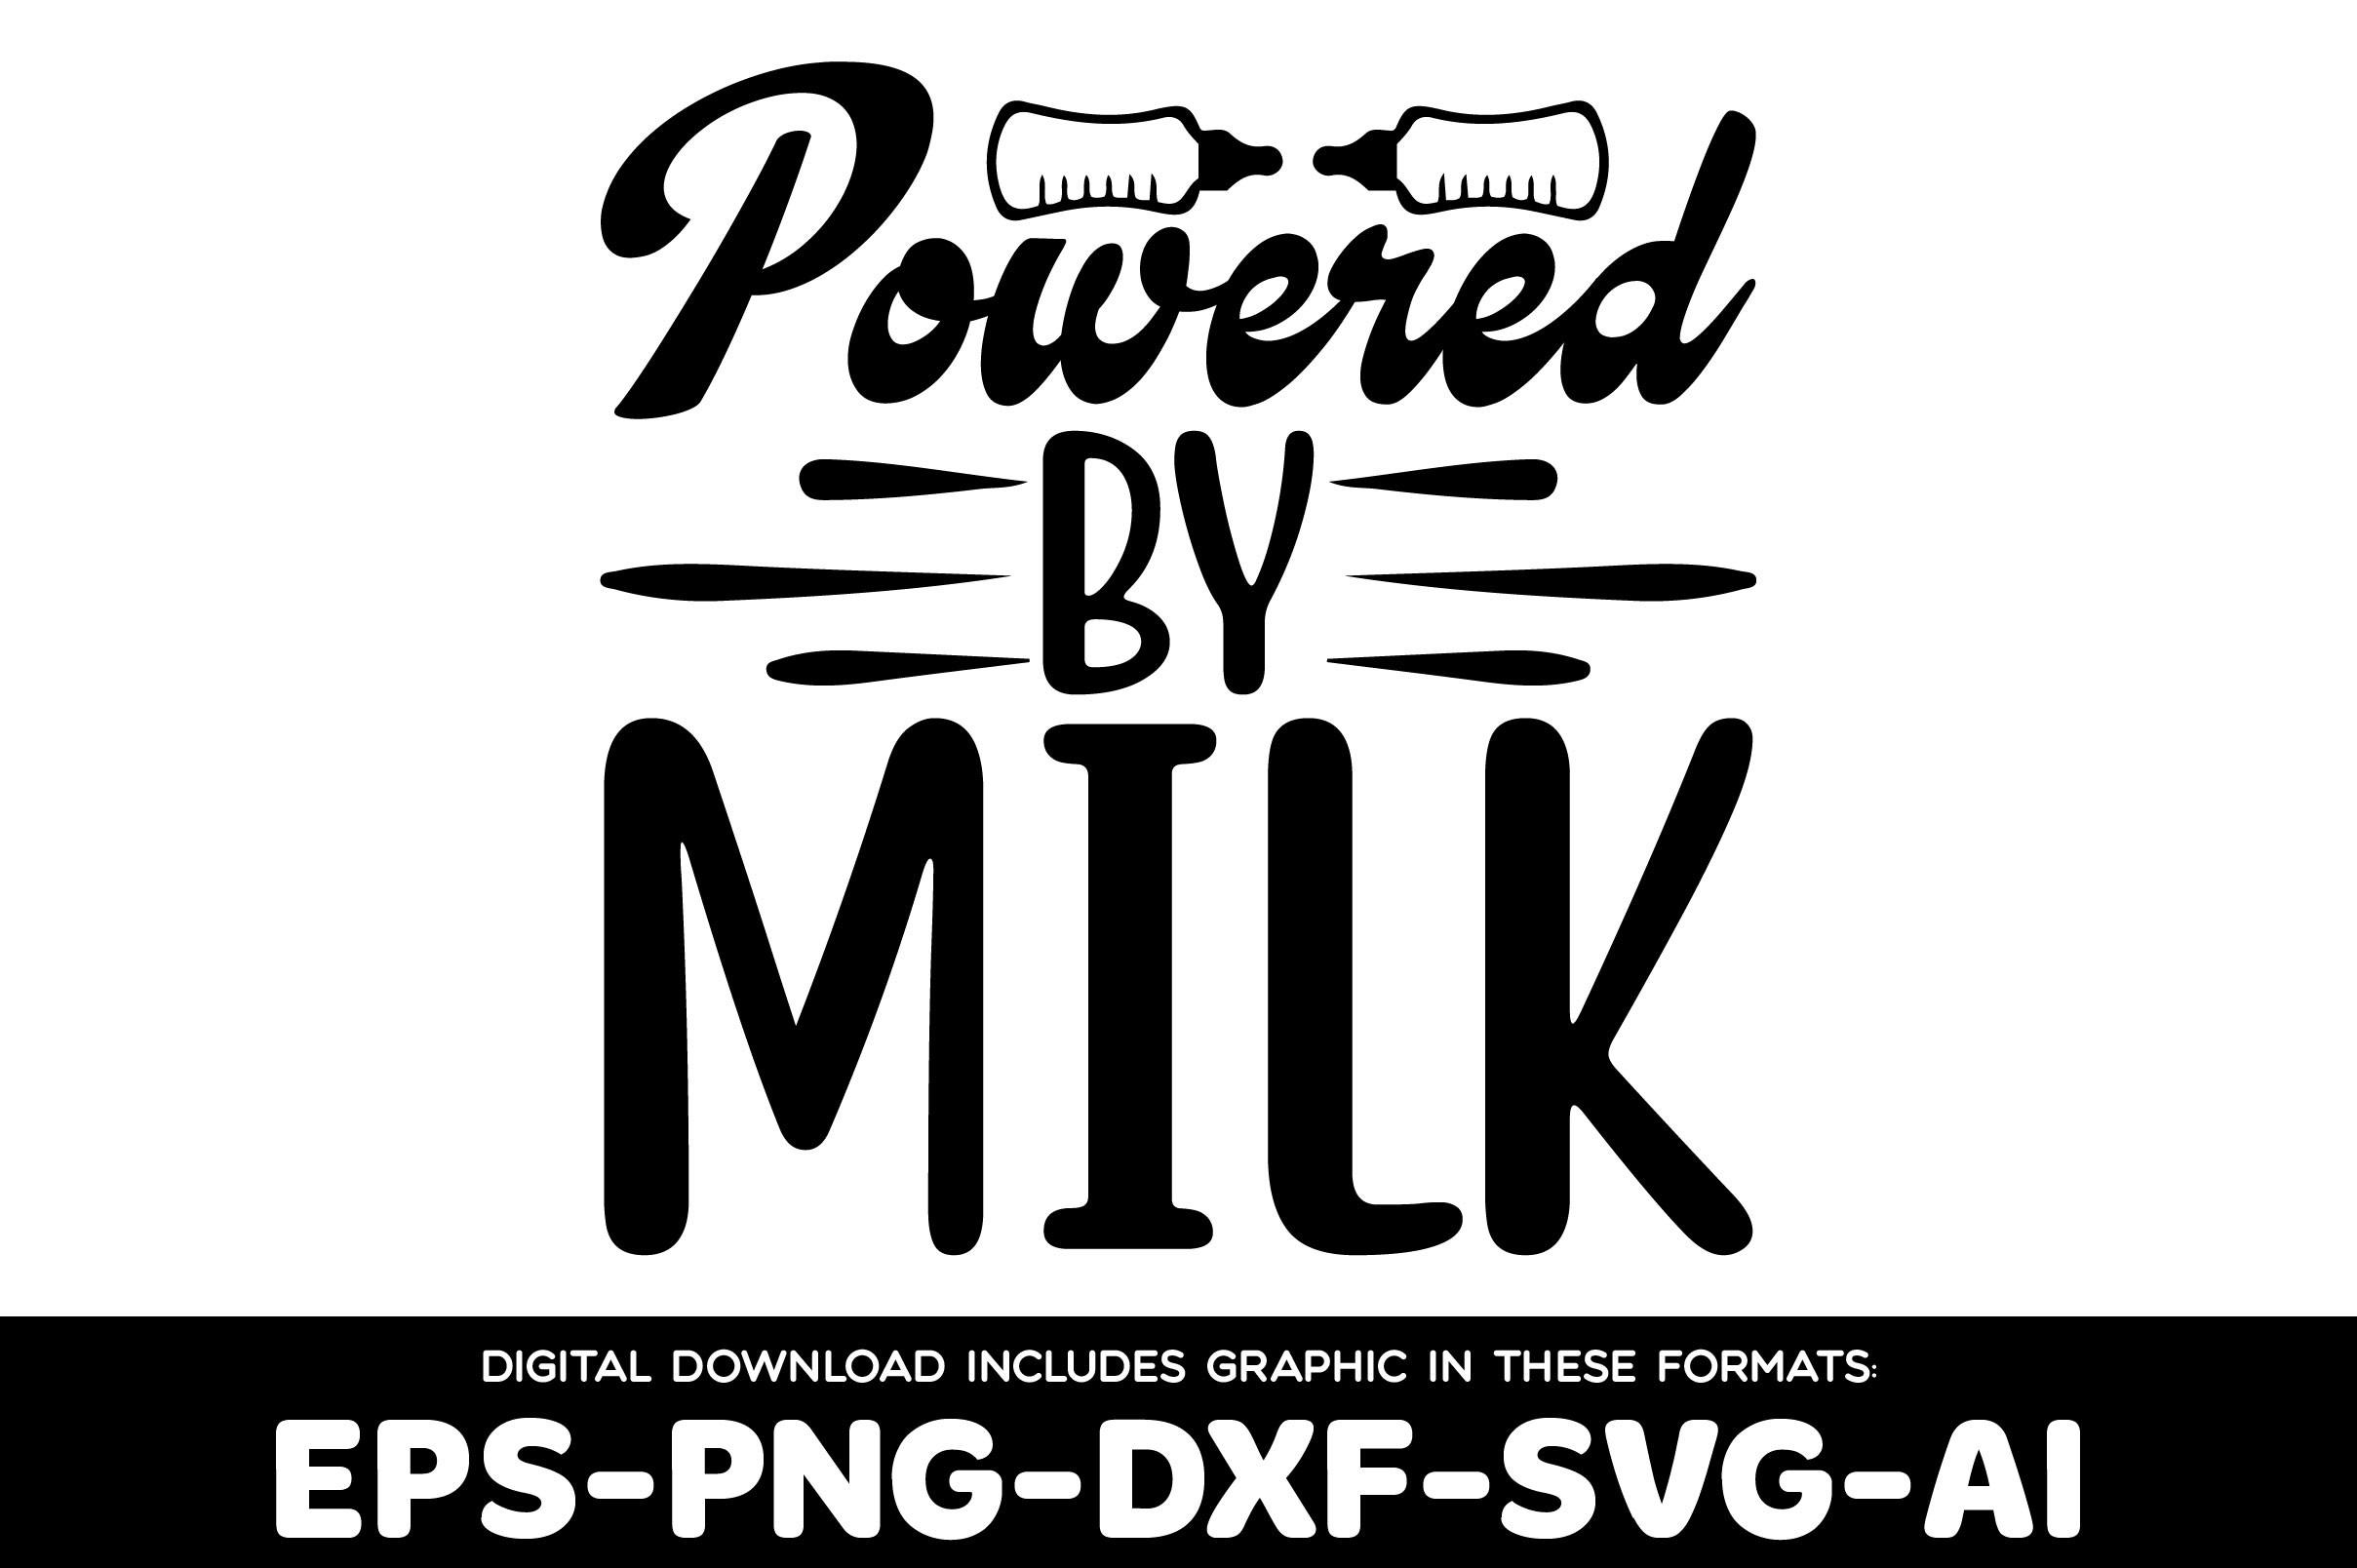 Powered by Milk